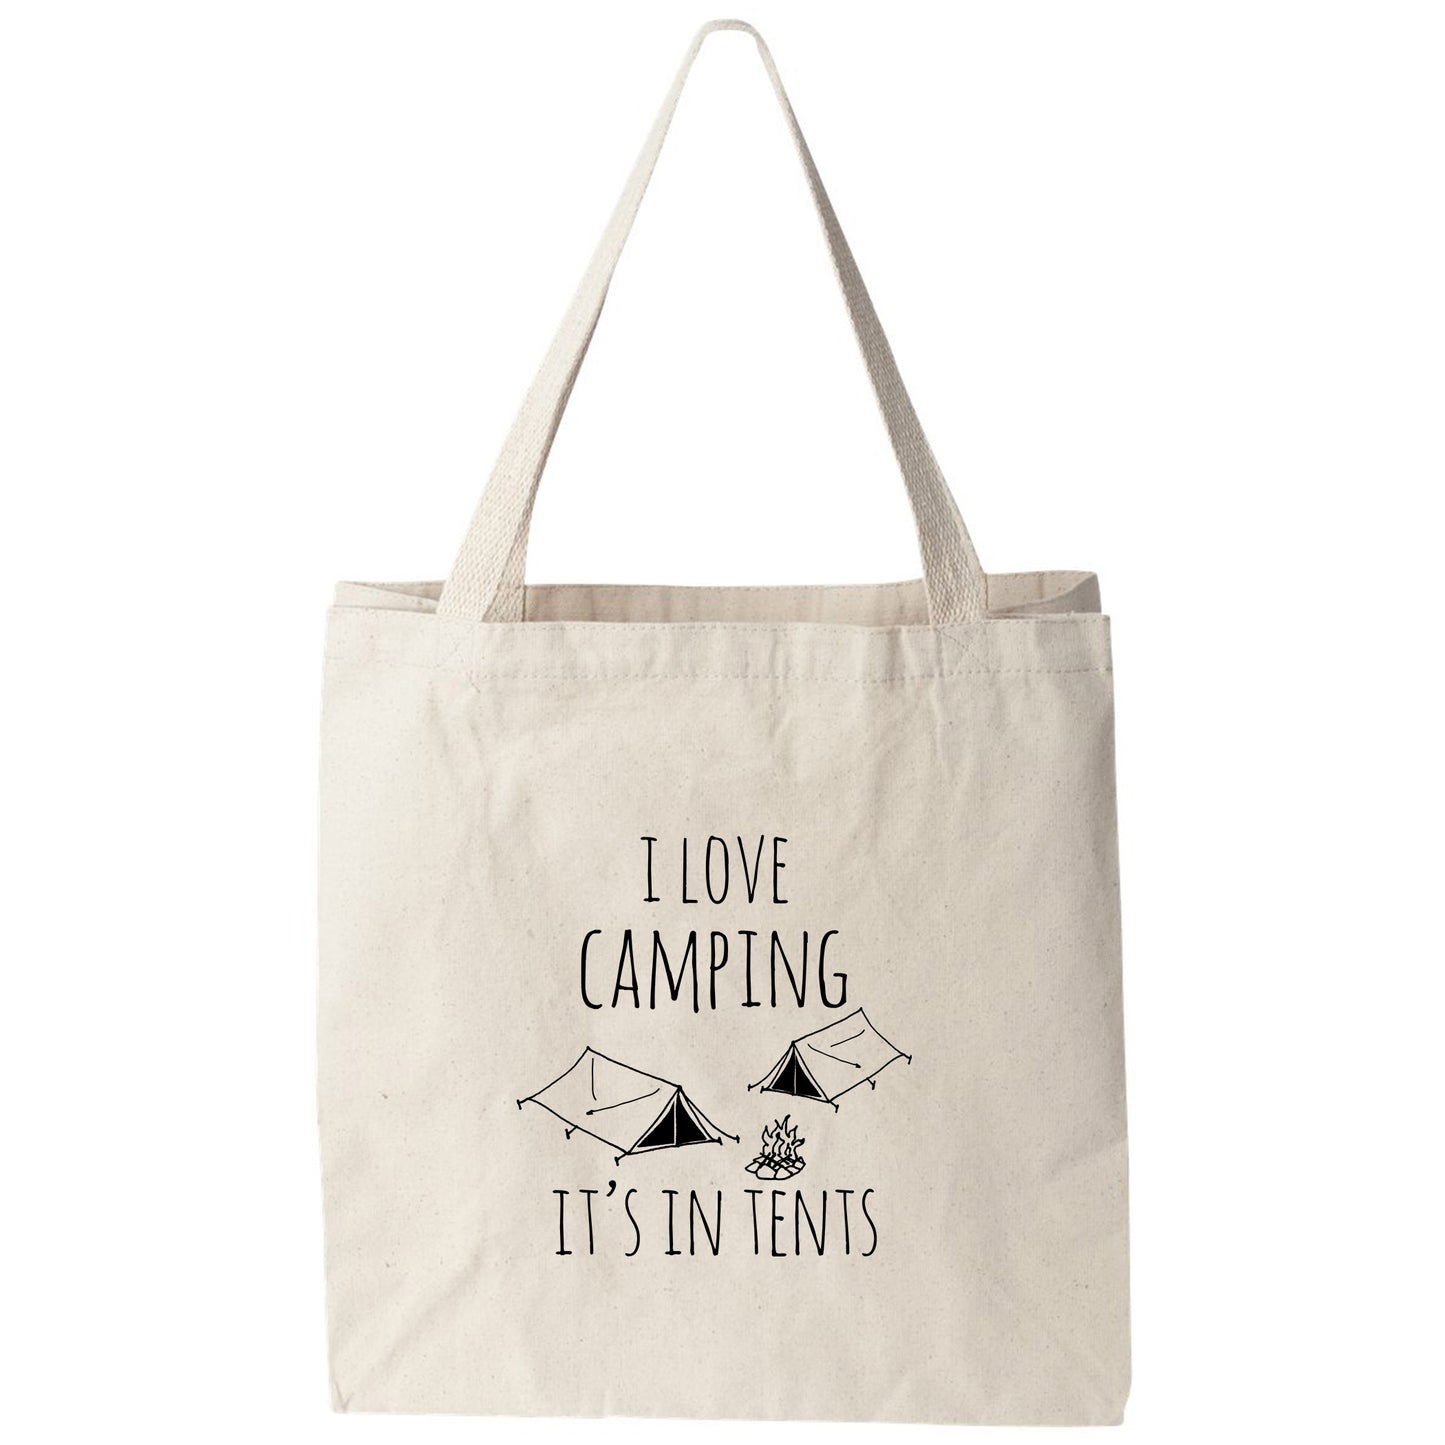 a tote bag that says love camping it's in tents